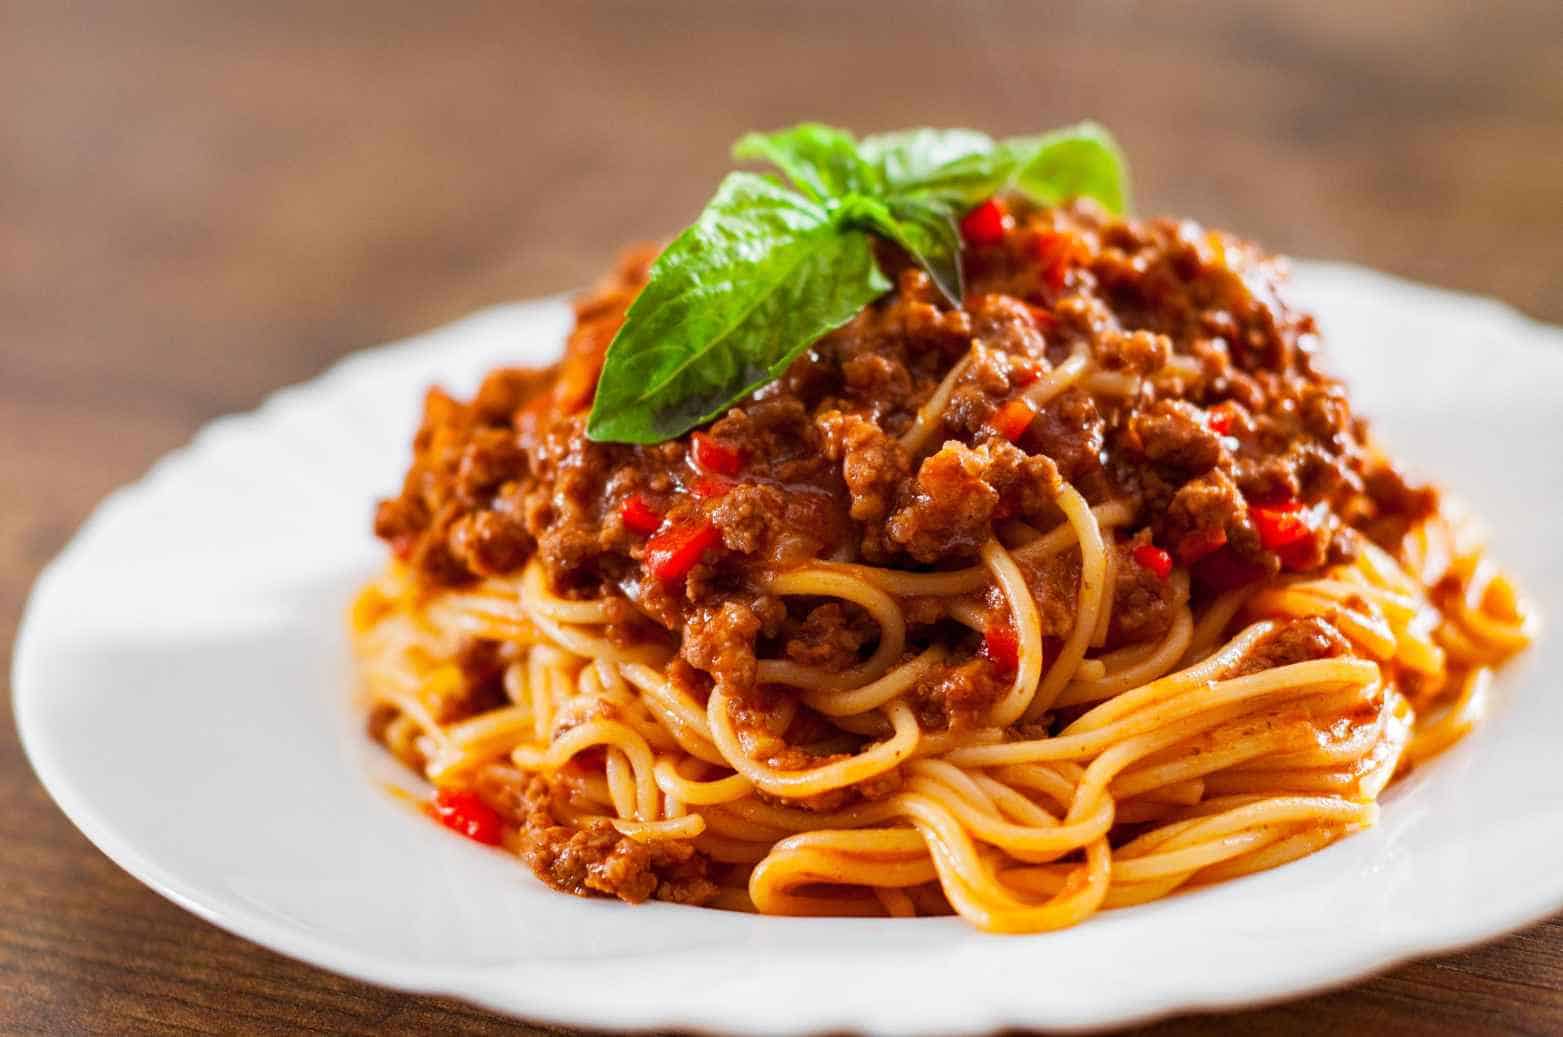 What Wine Goes With Bolognese Pasta